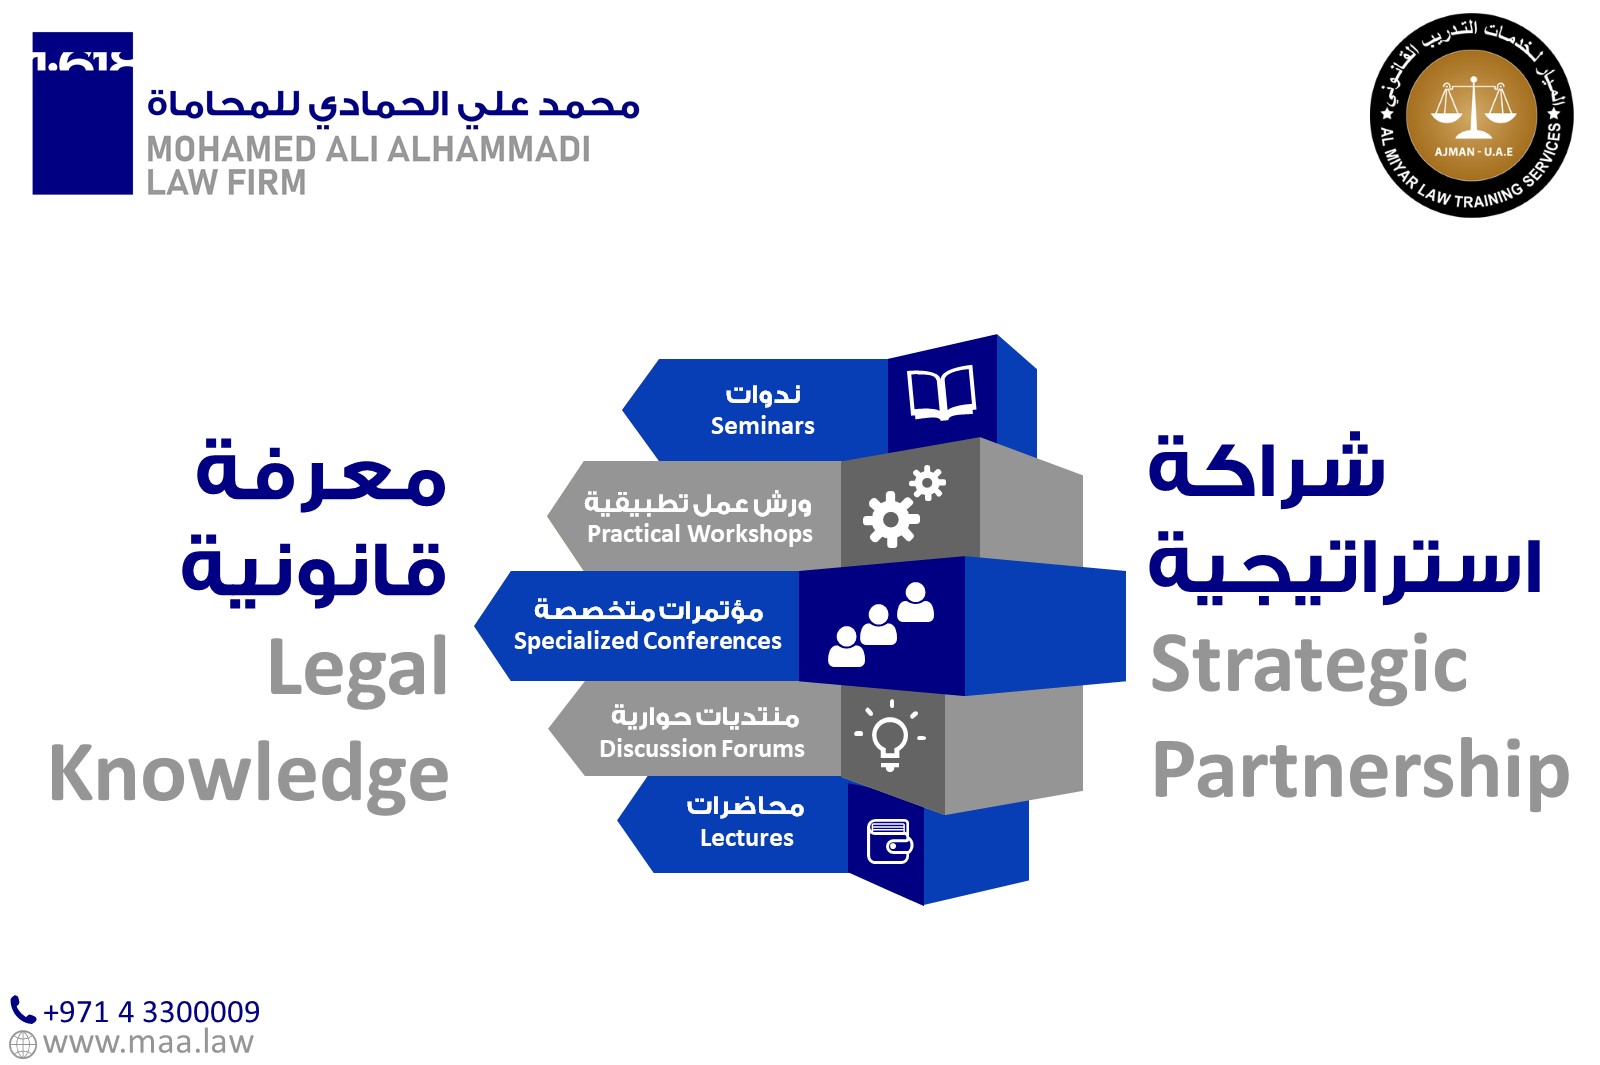 Mohamed Ali Alhammadi Law Firm signs a strategic partnership agreement with Al Miyar Center for Law Training Services in legal Knowledge Management and Specialized Conferences